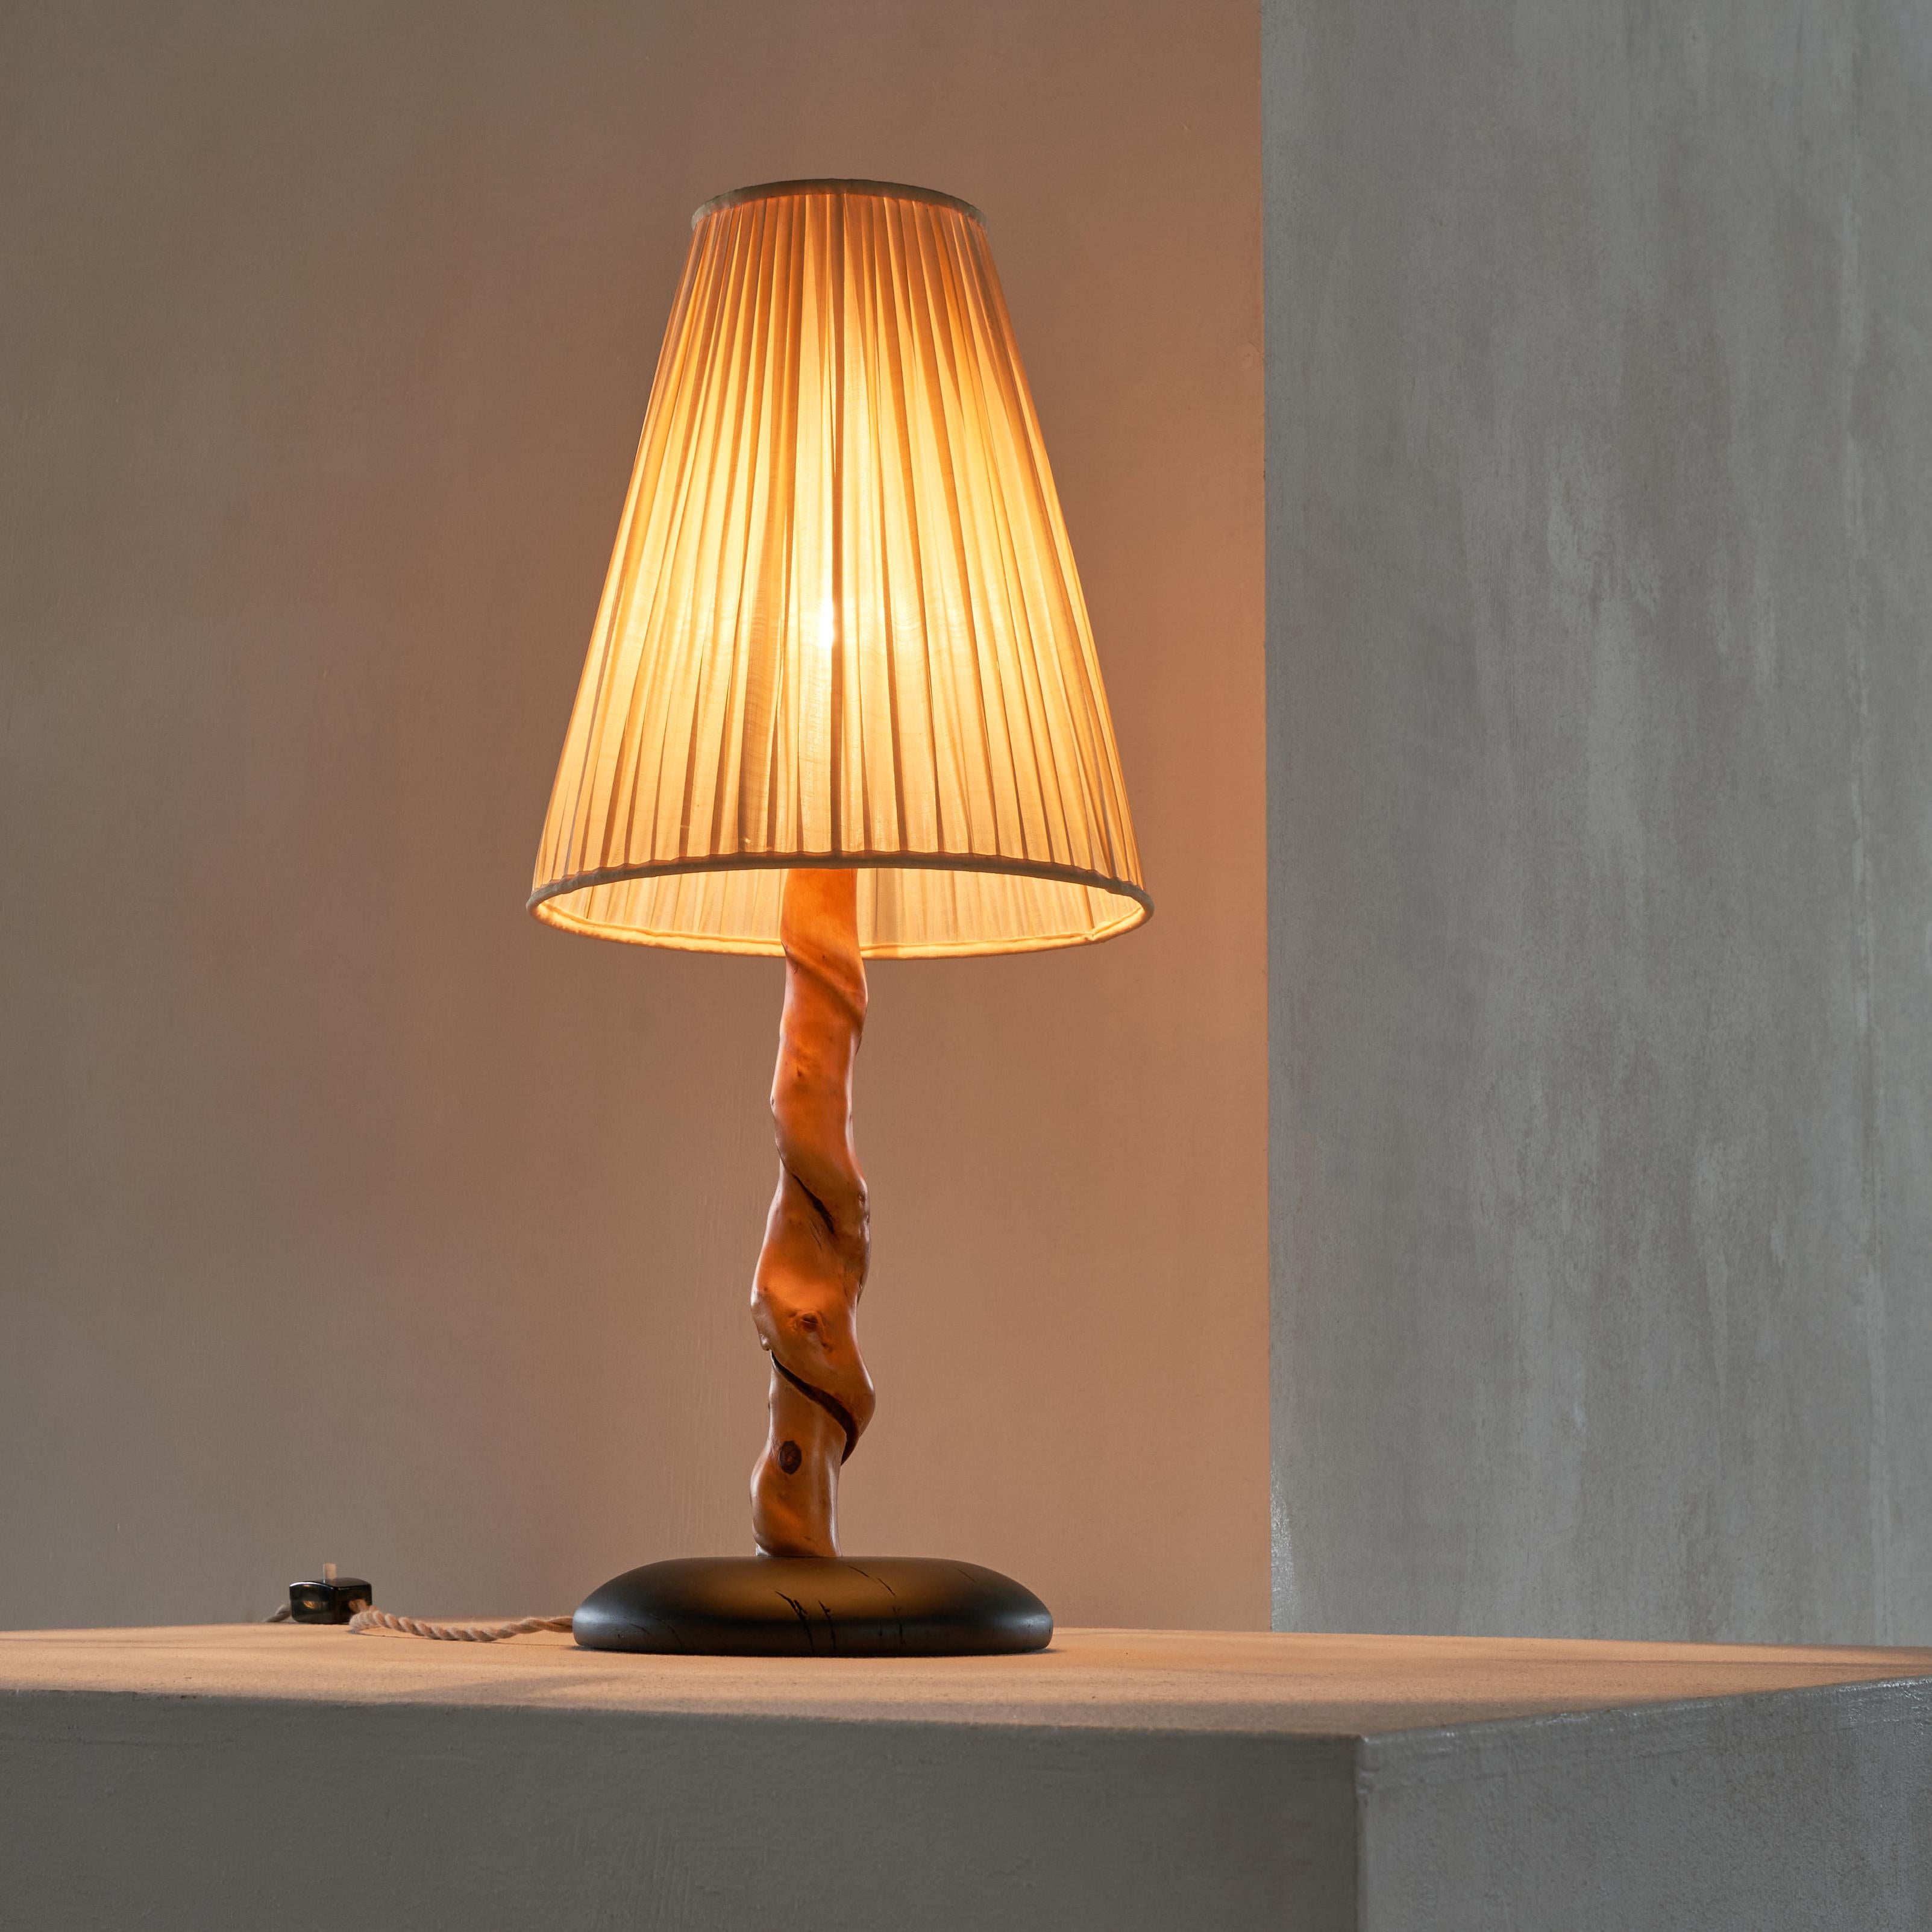 European Tree Trunk Table Lamp in Acacia, Oak and Linen, 1950s For Sale